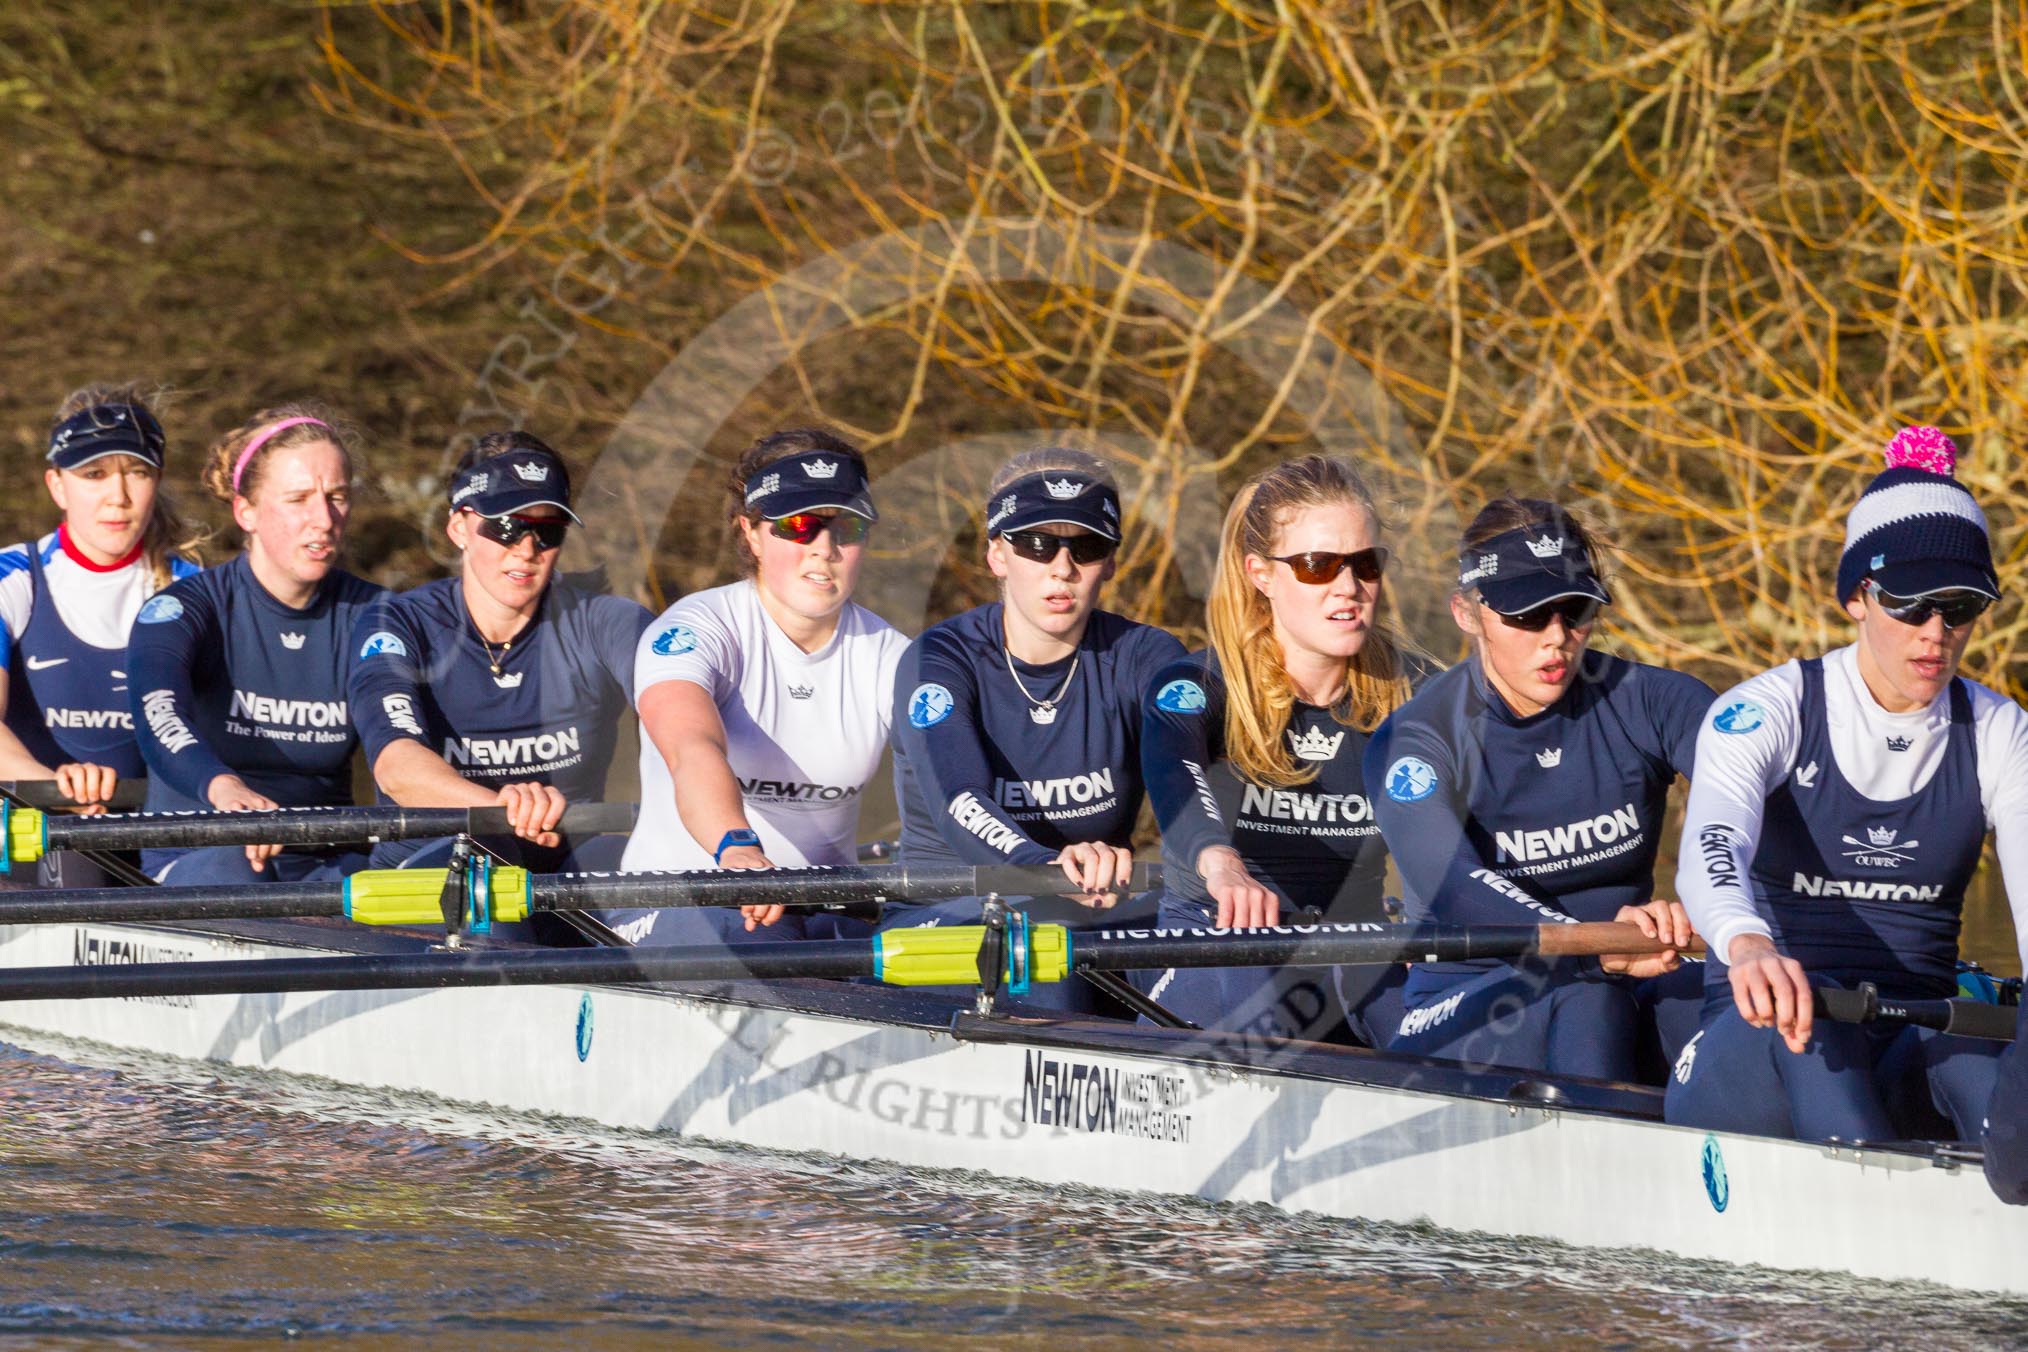 The Boat Race season 2015: OUWBC training Wallingford.

Wallingford,

United Kingdom,
on 04 March 2015 at 16:09, image #174